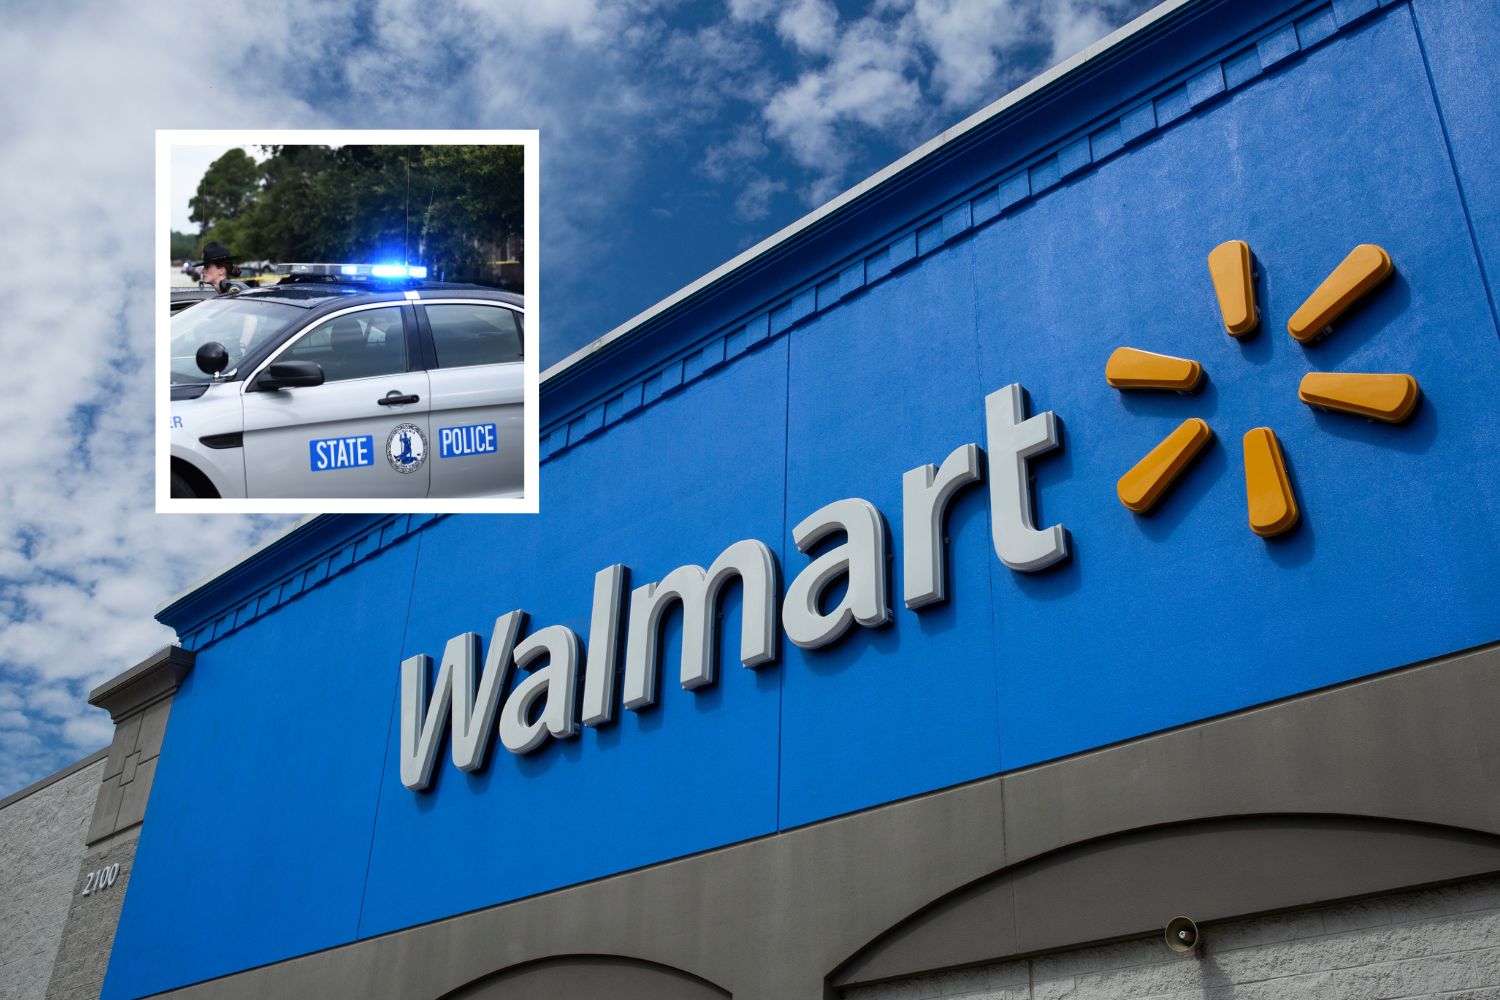 Walmart Manager Started Shooting People in the Break Room, Employee Claims